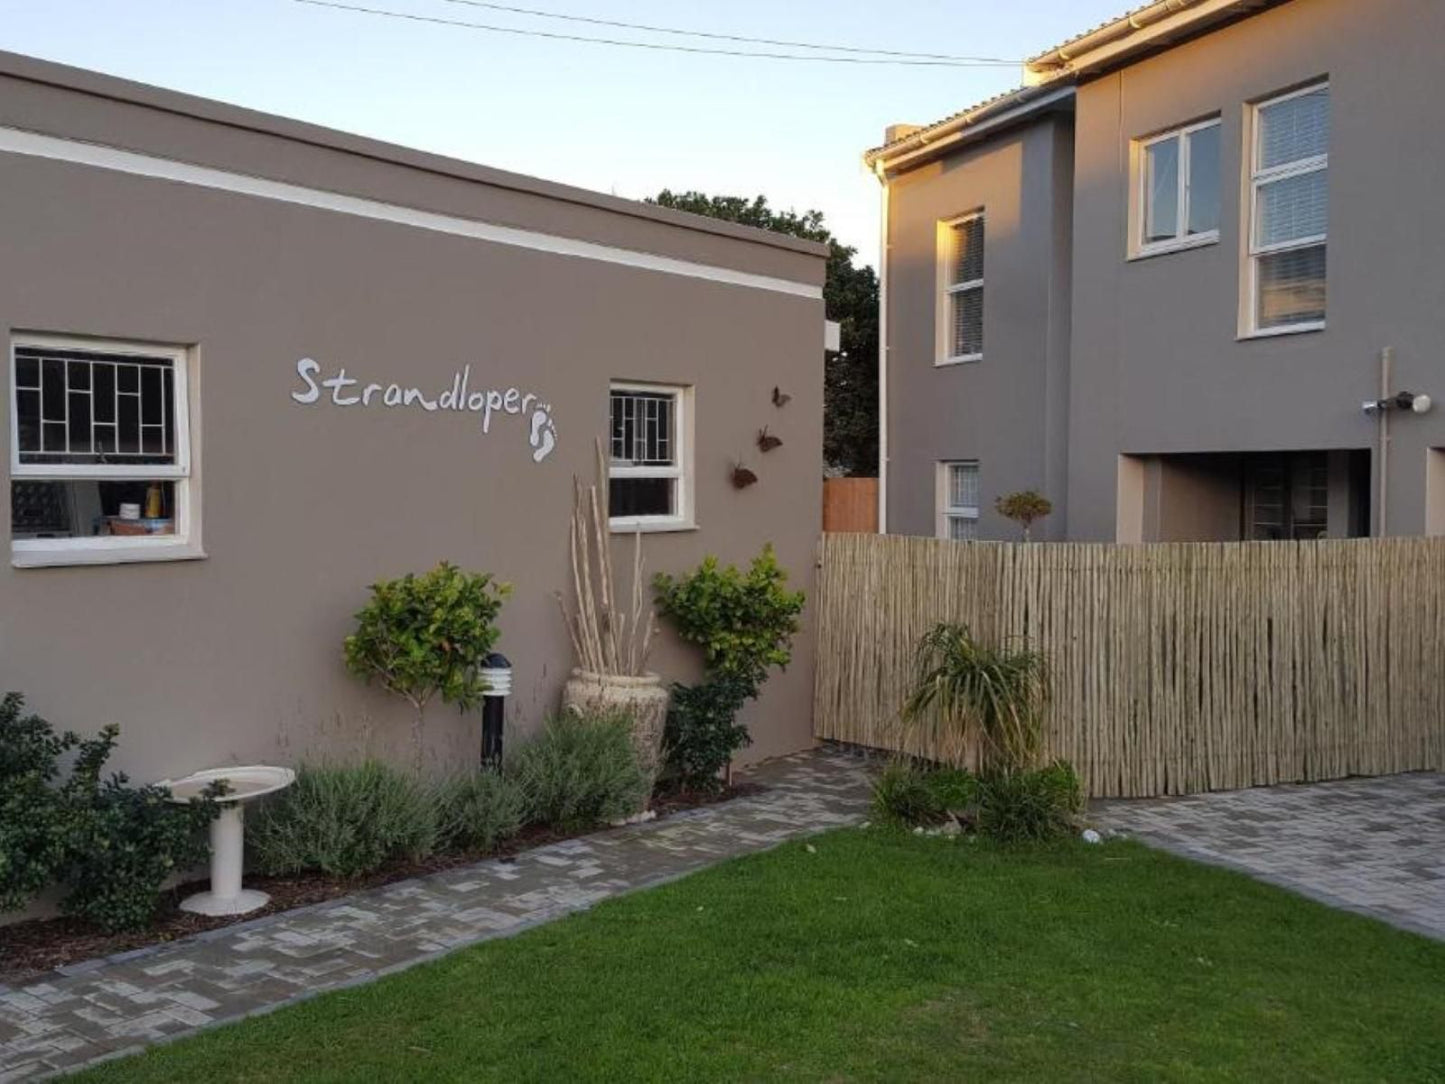 Strandloper Self Catering Onrus Hermanus Western Cape South Africa House, Building, Architecture, Sign